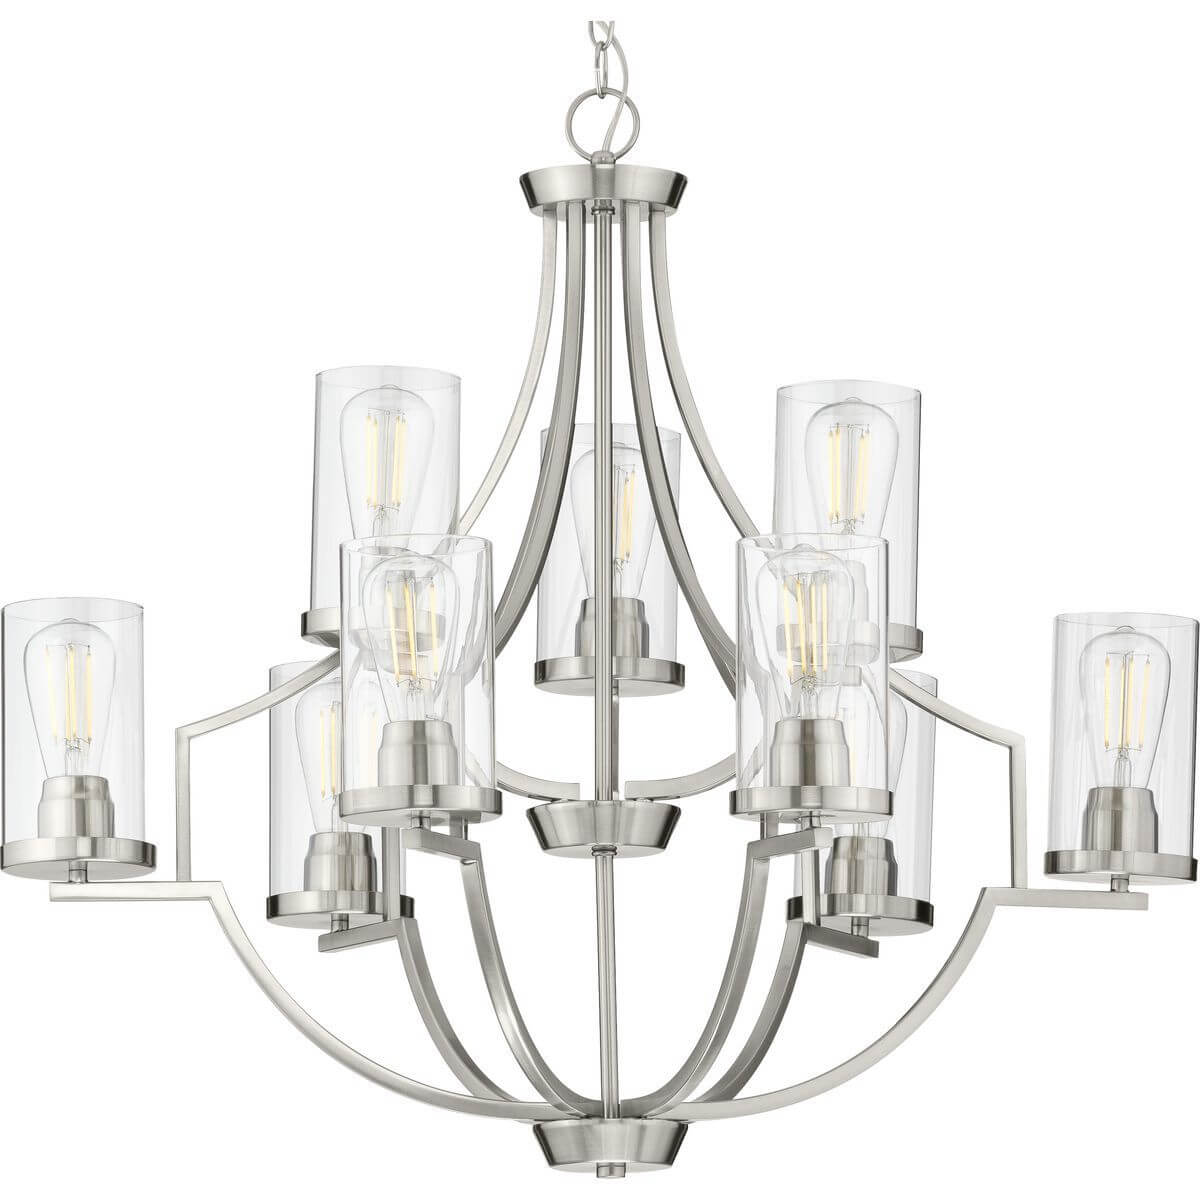 Progress Lighting Lassiter 9 Light 32 inch Chandelier in Brushed Nickel with Clear Glass P400198-009